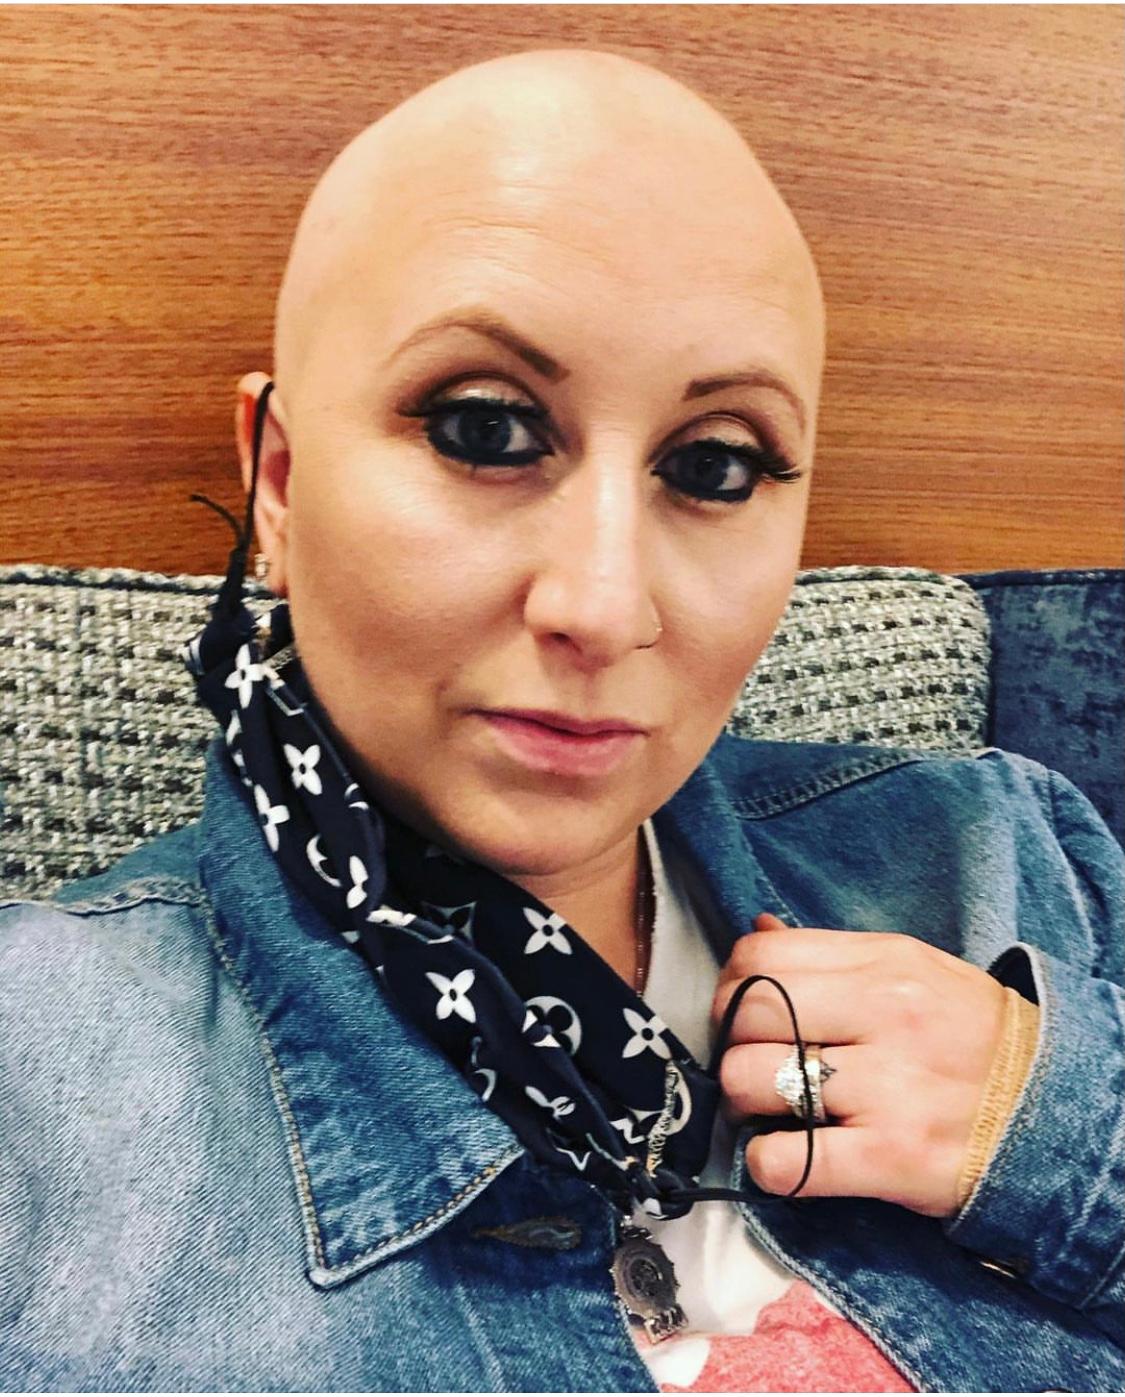 New Jersey mother Christina Korines, photographed while in treatment for cancer in Middletown, New Jersey, in 2020. (Courtesy of Christina Korines)